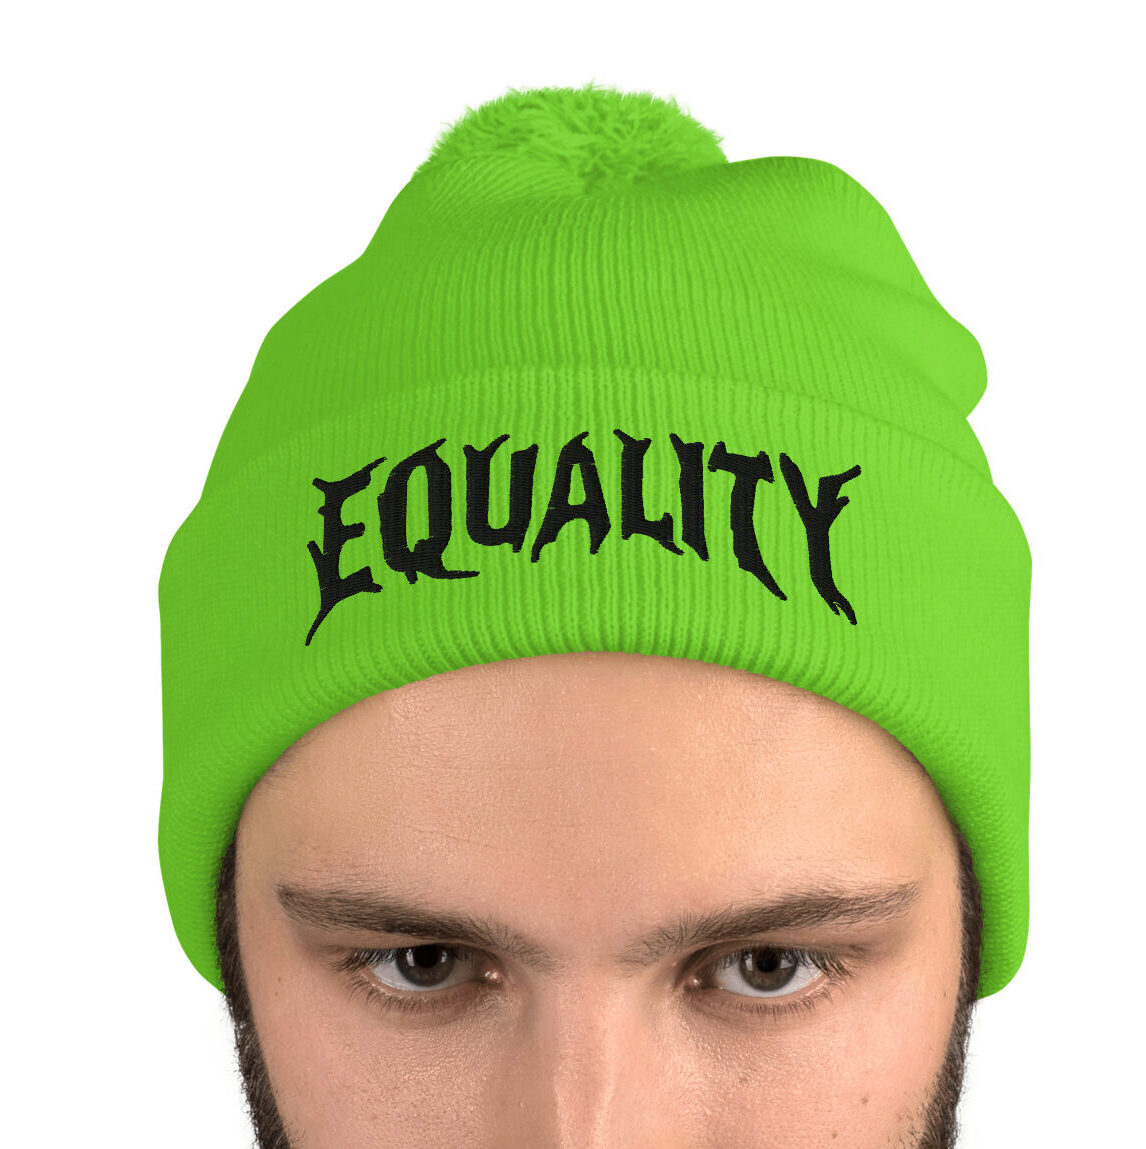 Featured image for “Equality - Neon Pom-Pom Beanie”